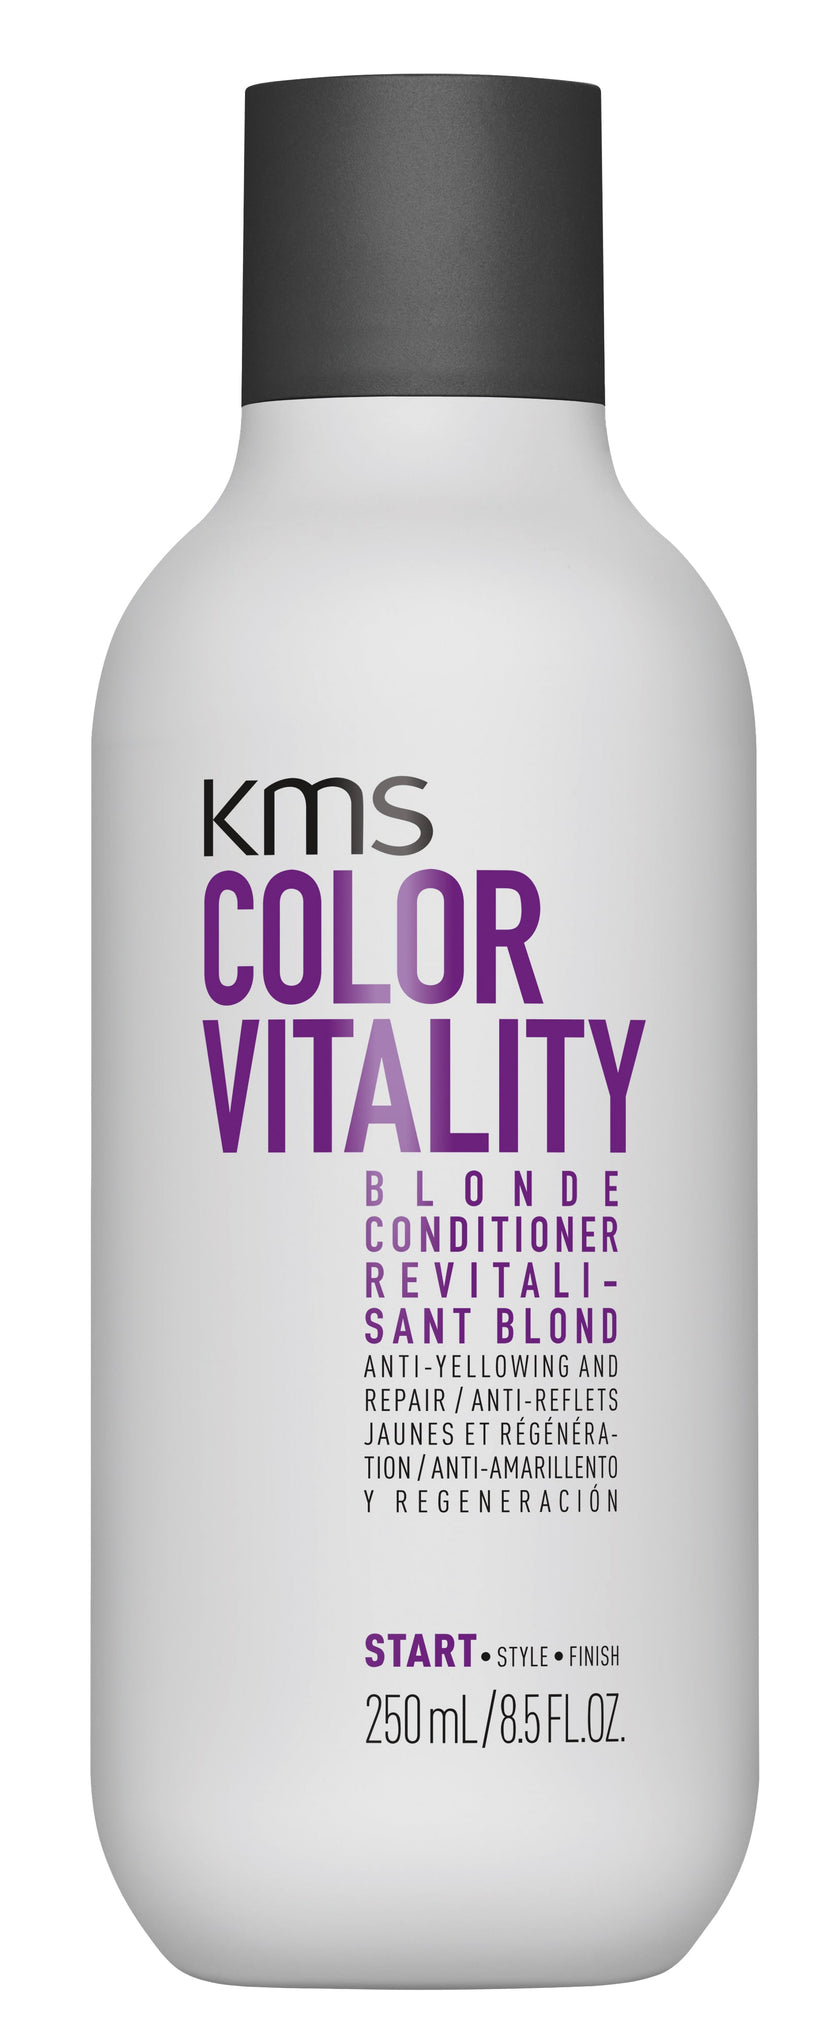 ColorVitality Blonde Conditioner Image